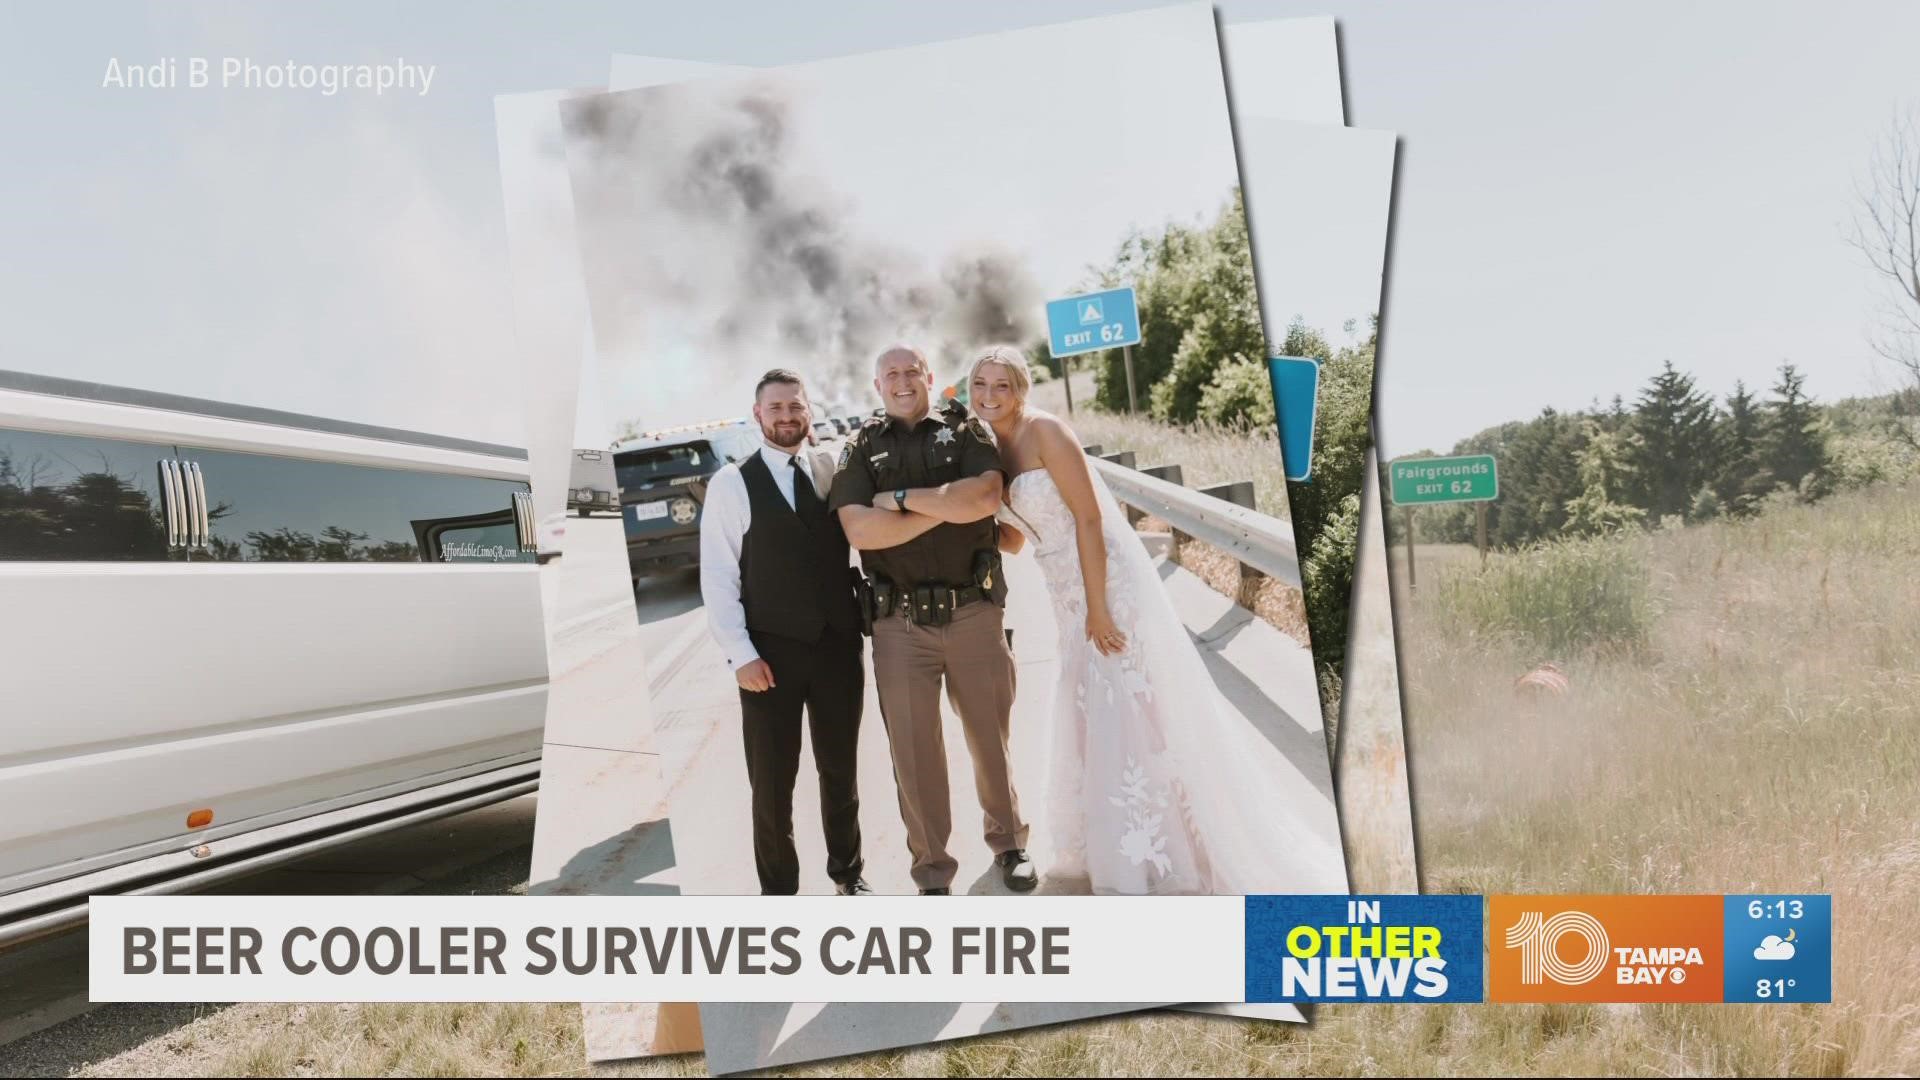 Isabel and Brendan Kiel's limo began to smoke en route to their reception. Everyone made it out safely, and the bridal party is left with memories for a lifetime.